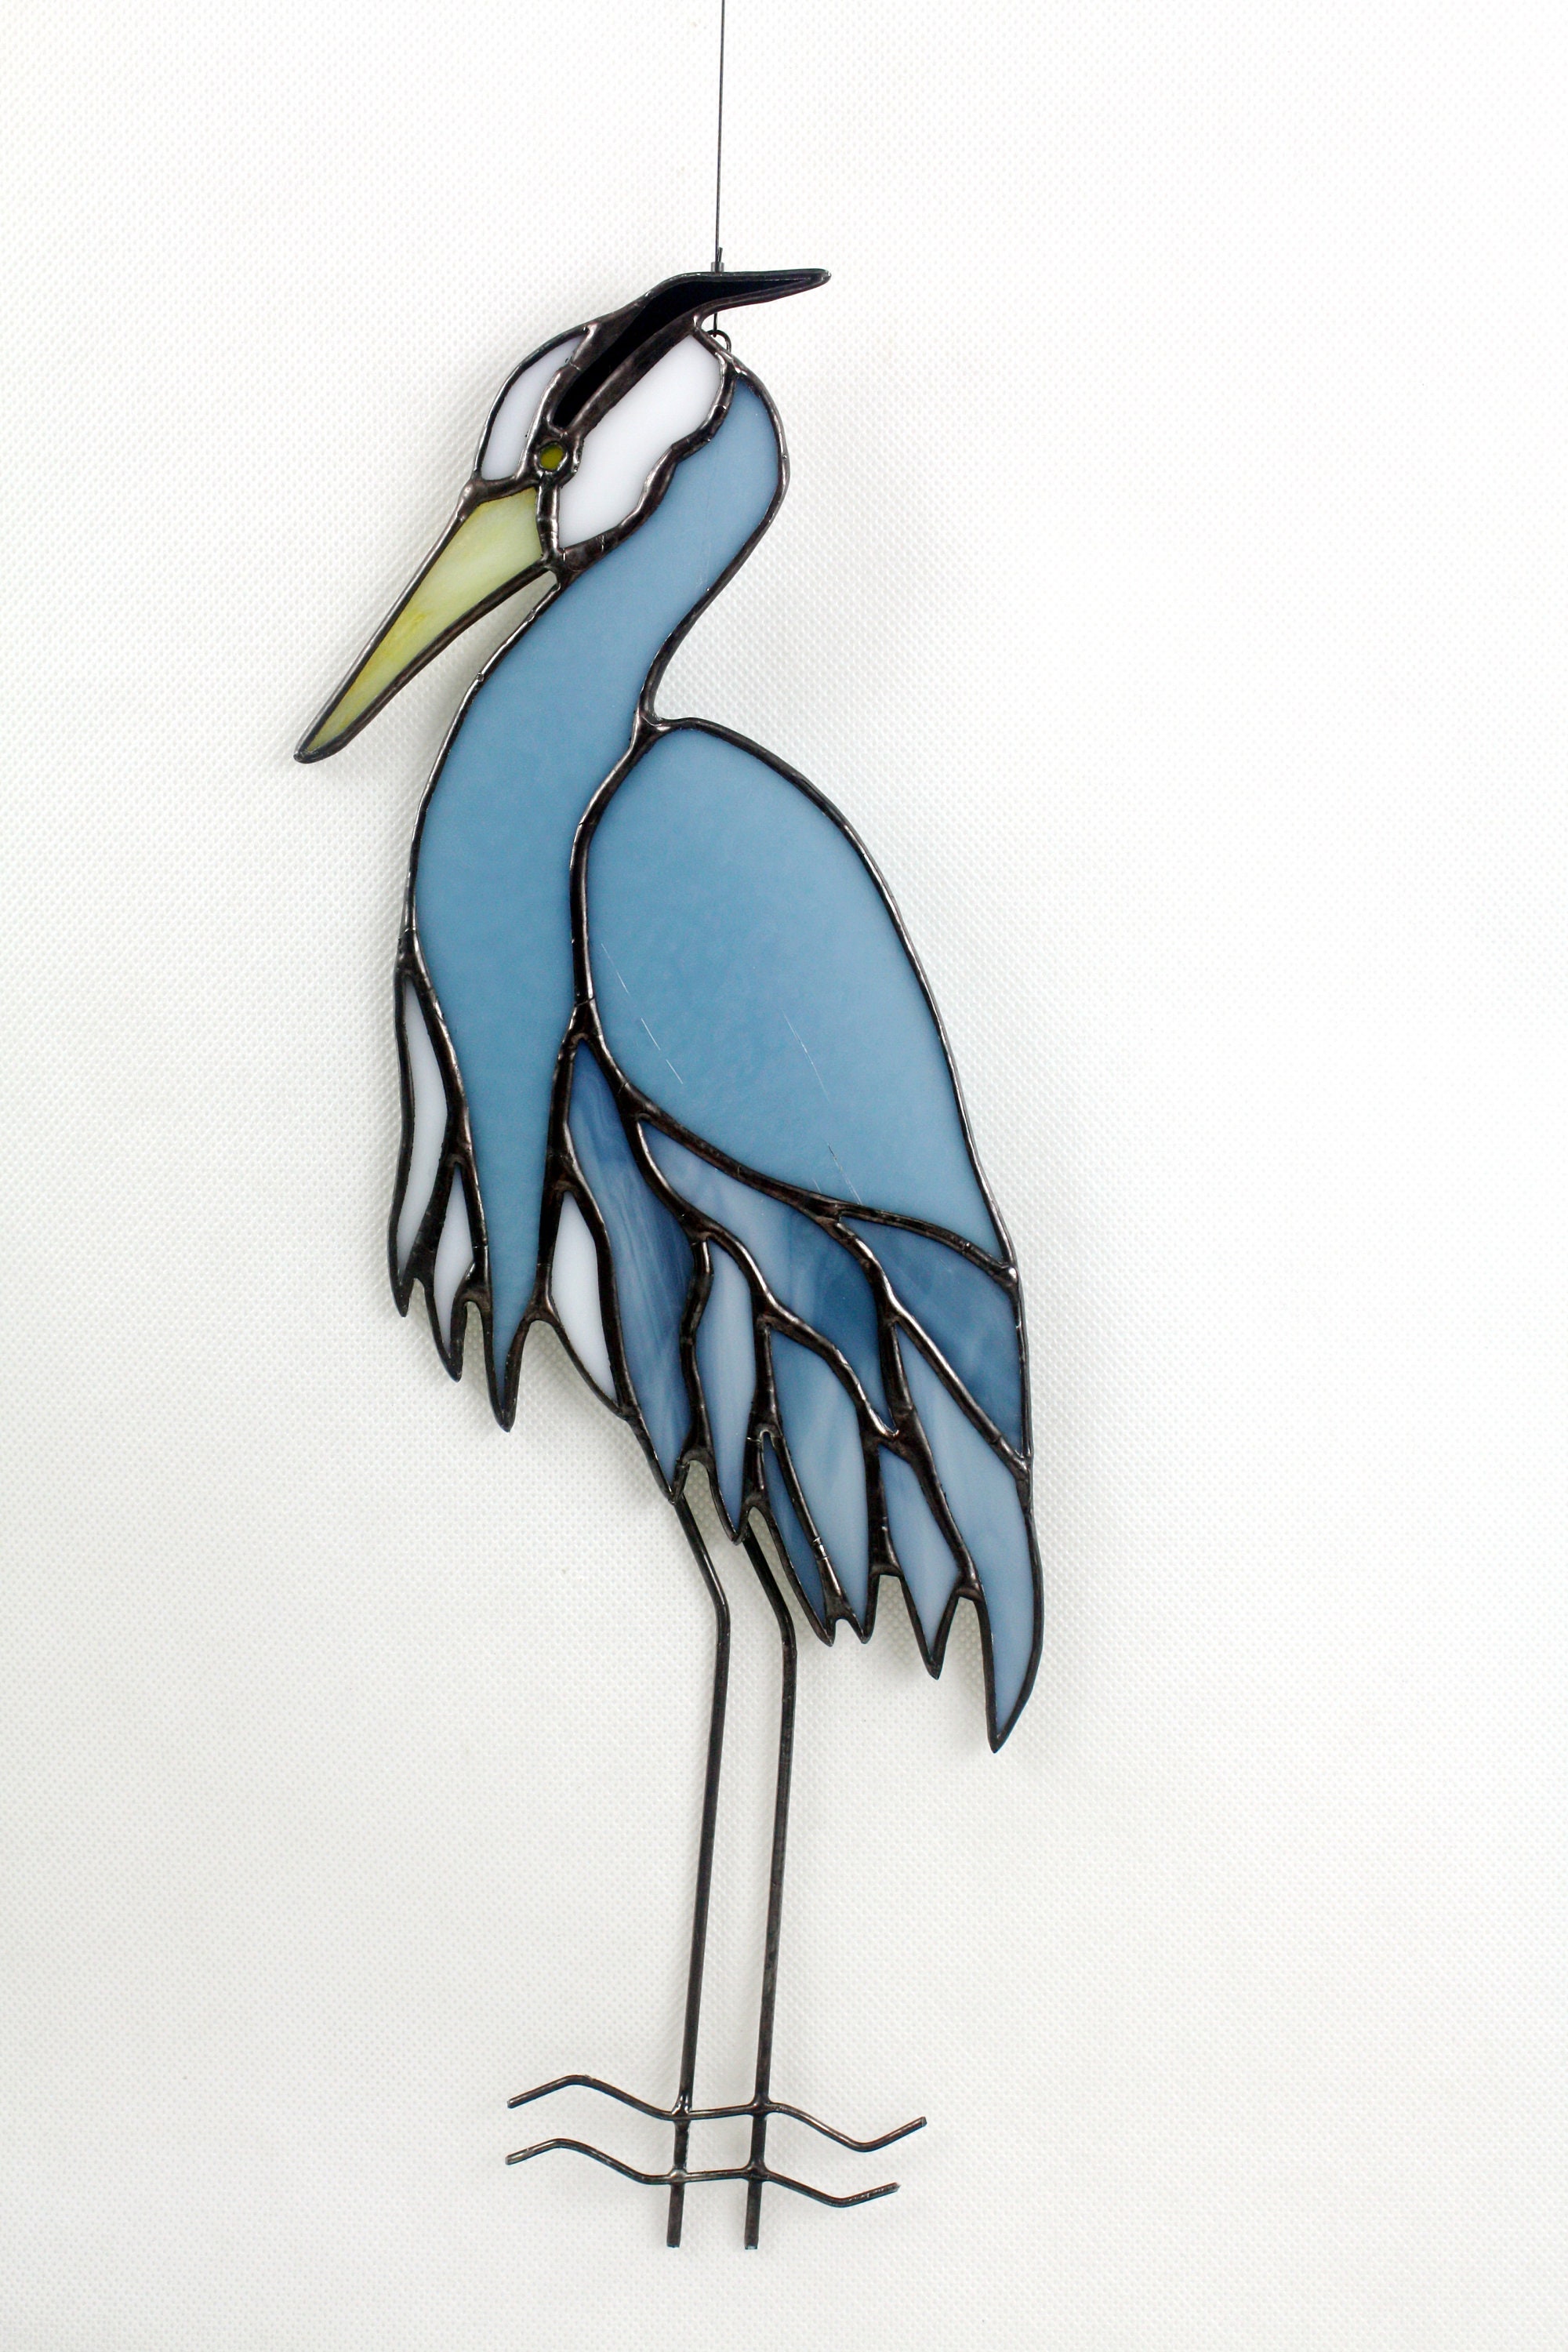 Faux stained glass window, Gallery glass paint, blue heron